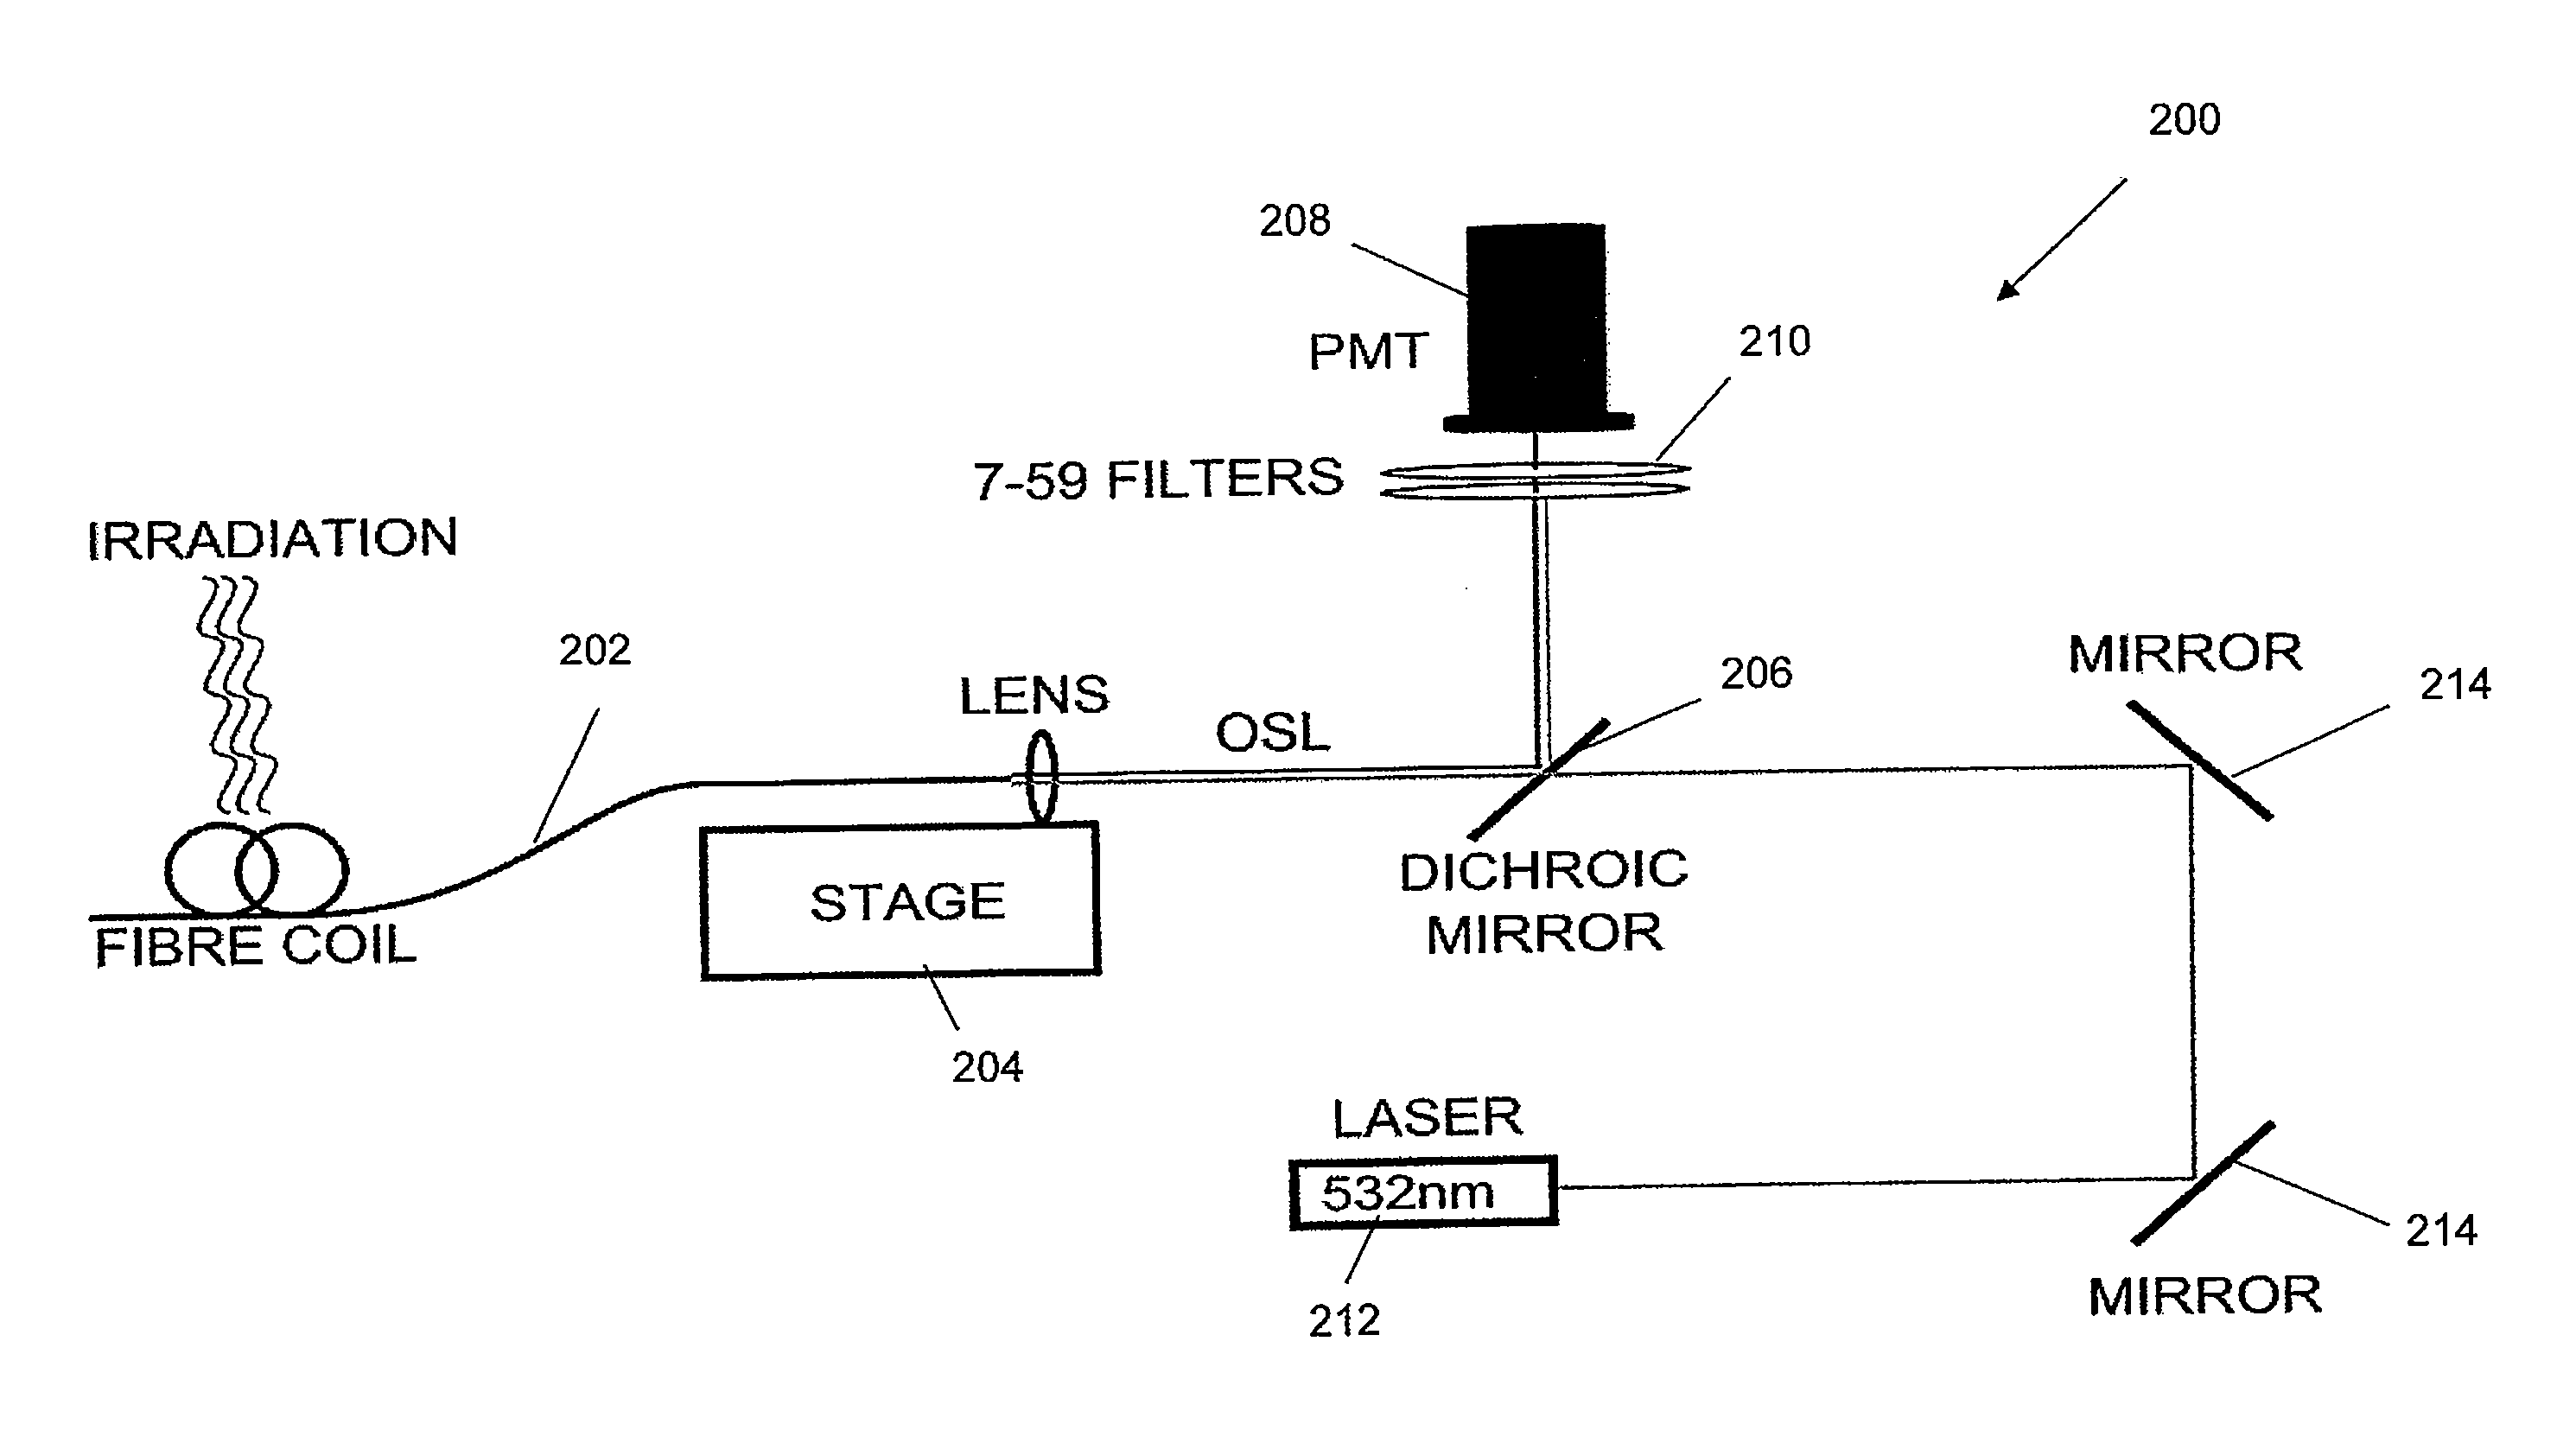 Optical detector for detecting radiation